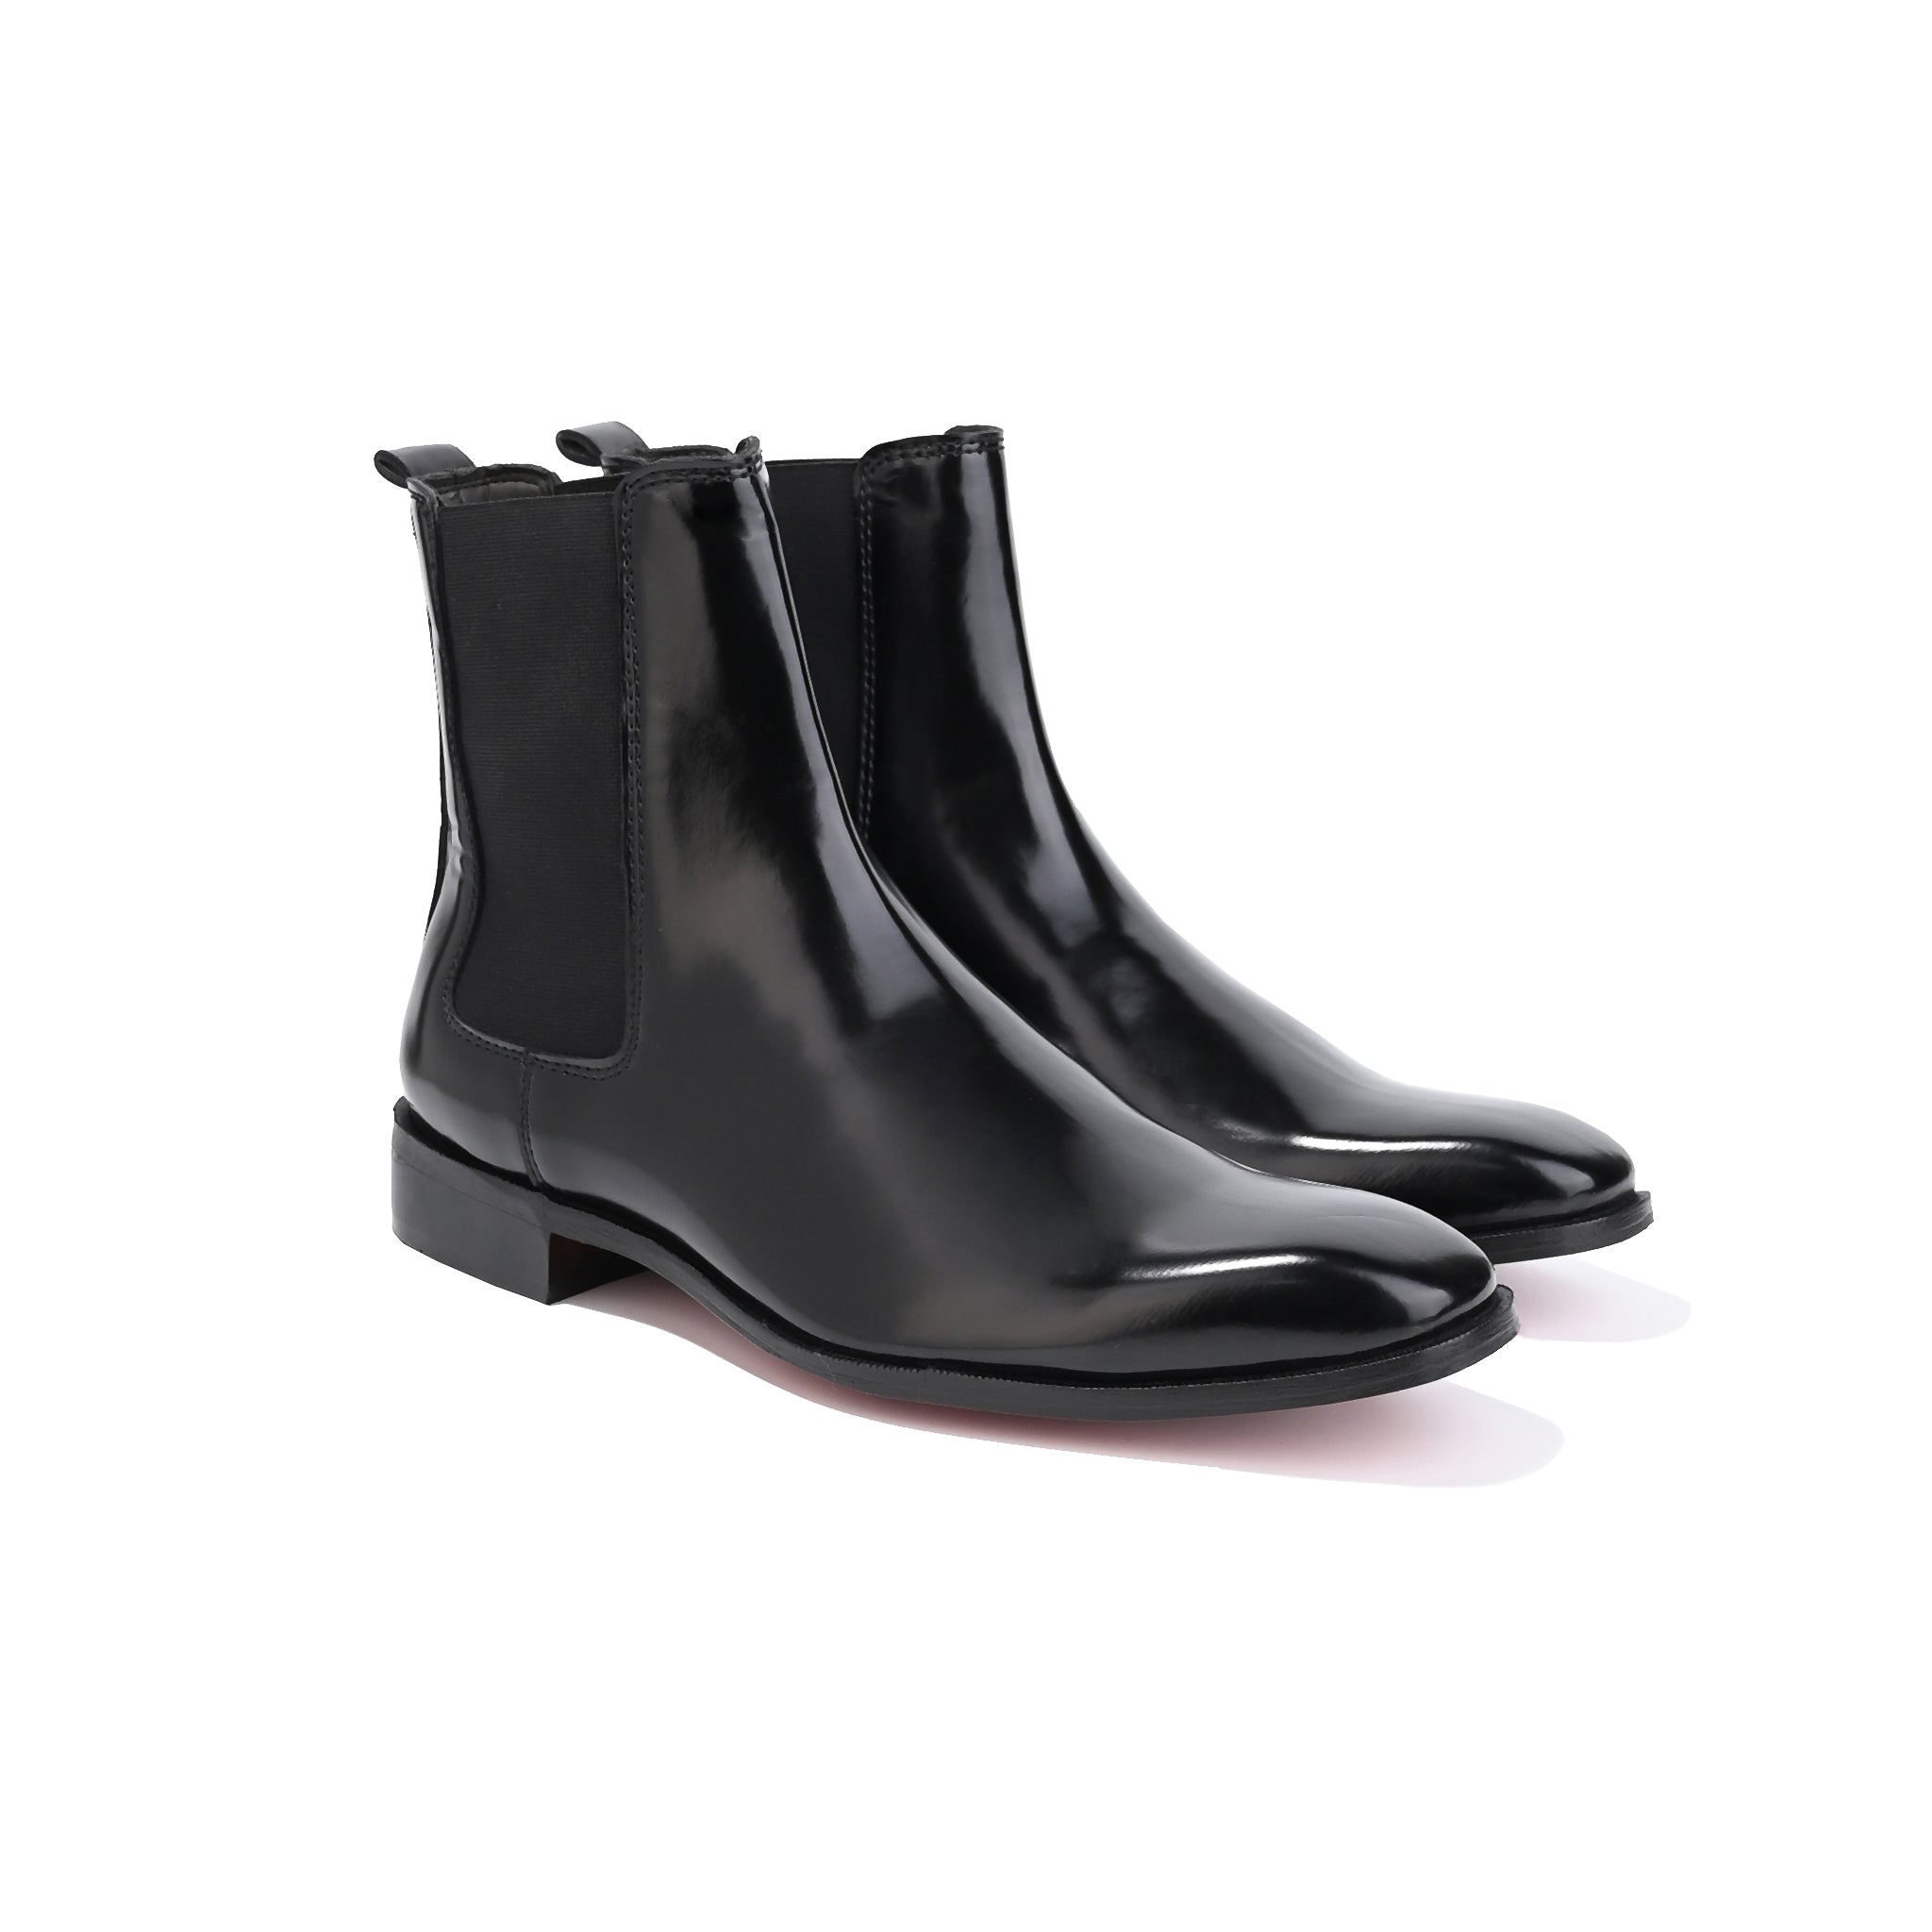 Coal Black Leather High Ankle Boots